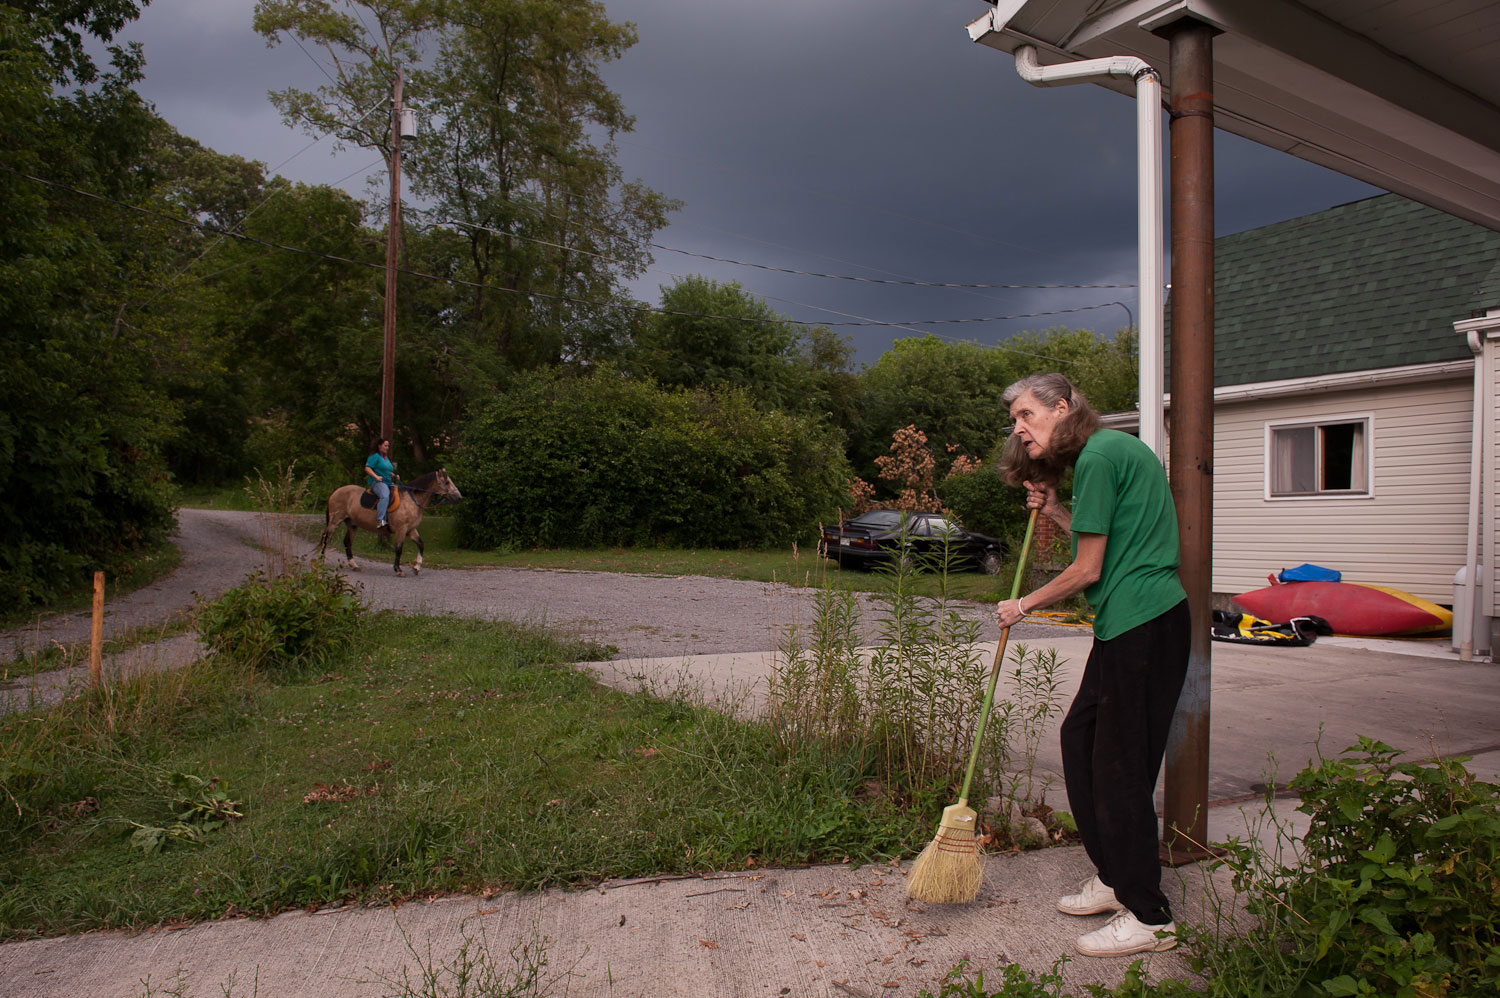 From left: Tammy and Eleanor Copeman outside the family home in Elkins, W.Va., on July 14, 2012.